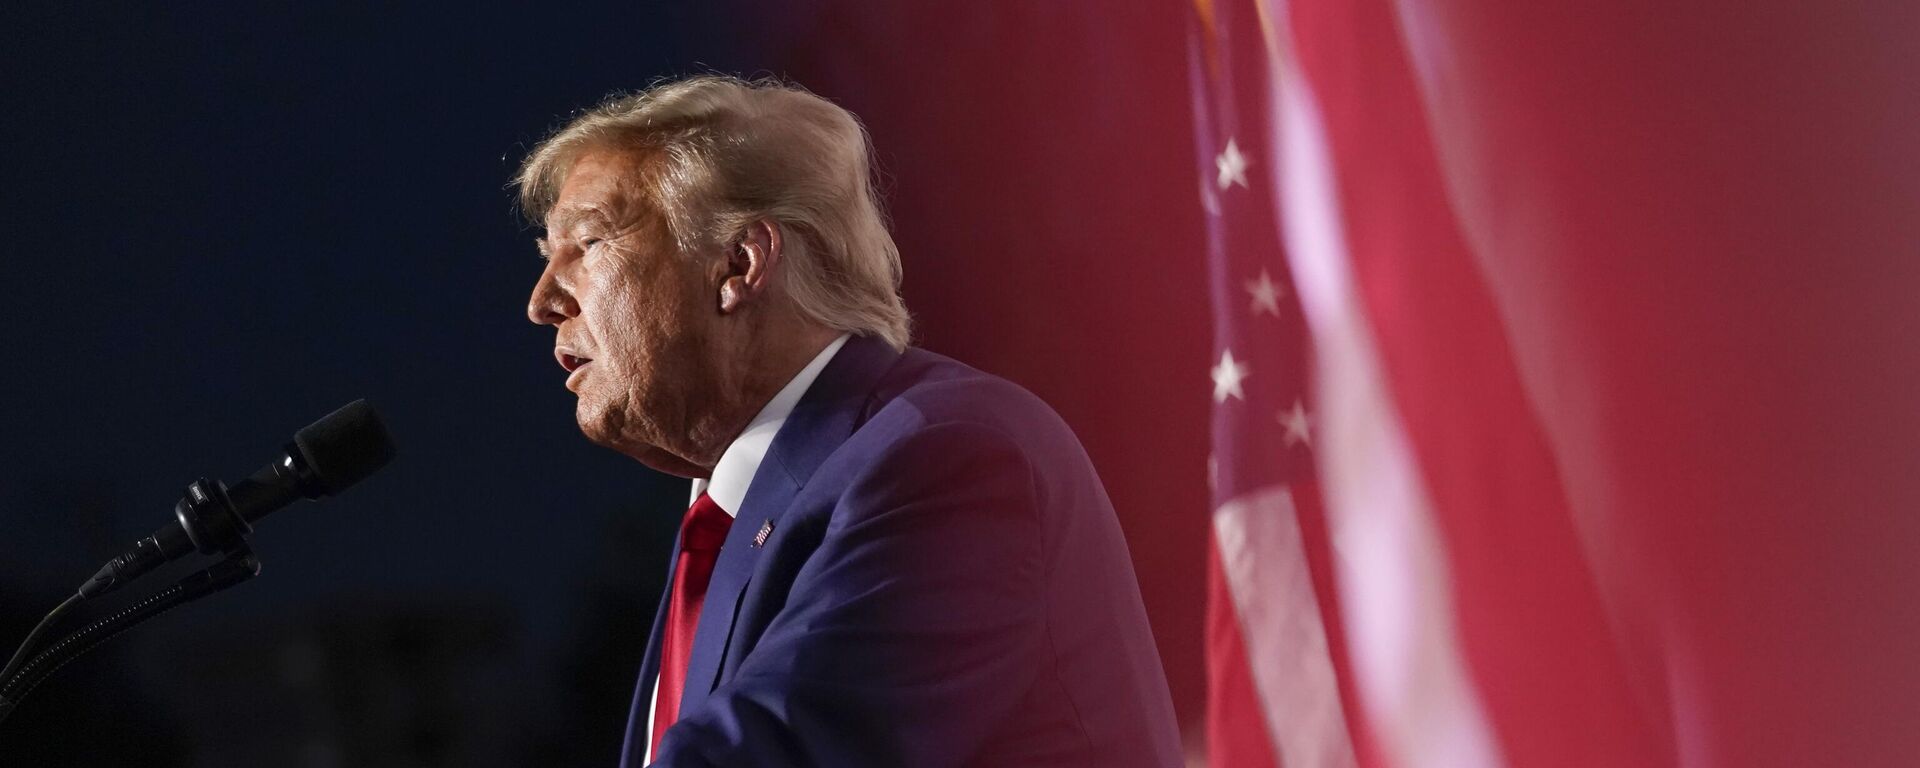 Former President Donald Trump speaks at Trump National Golf Club in Bedminster, N.J., Tuesday, June 13, 2023, after pleading not guilty in a Miami courtroom earlier in the day to dozens of felony counts that he hoarded classified documents and refused government demands to give them back. - Sputnik International, 1920, 17.08.2023